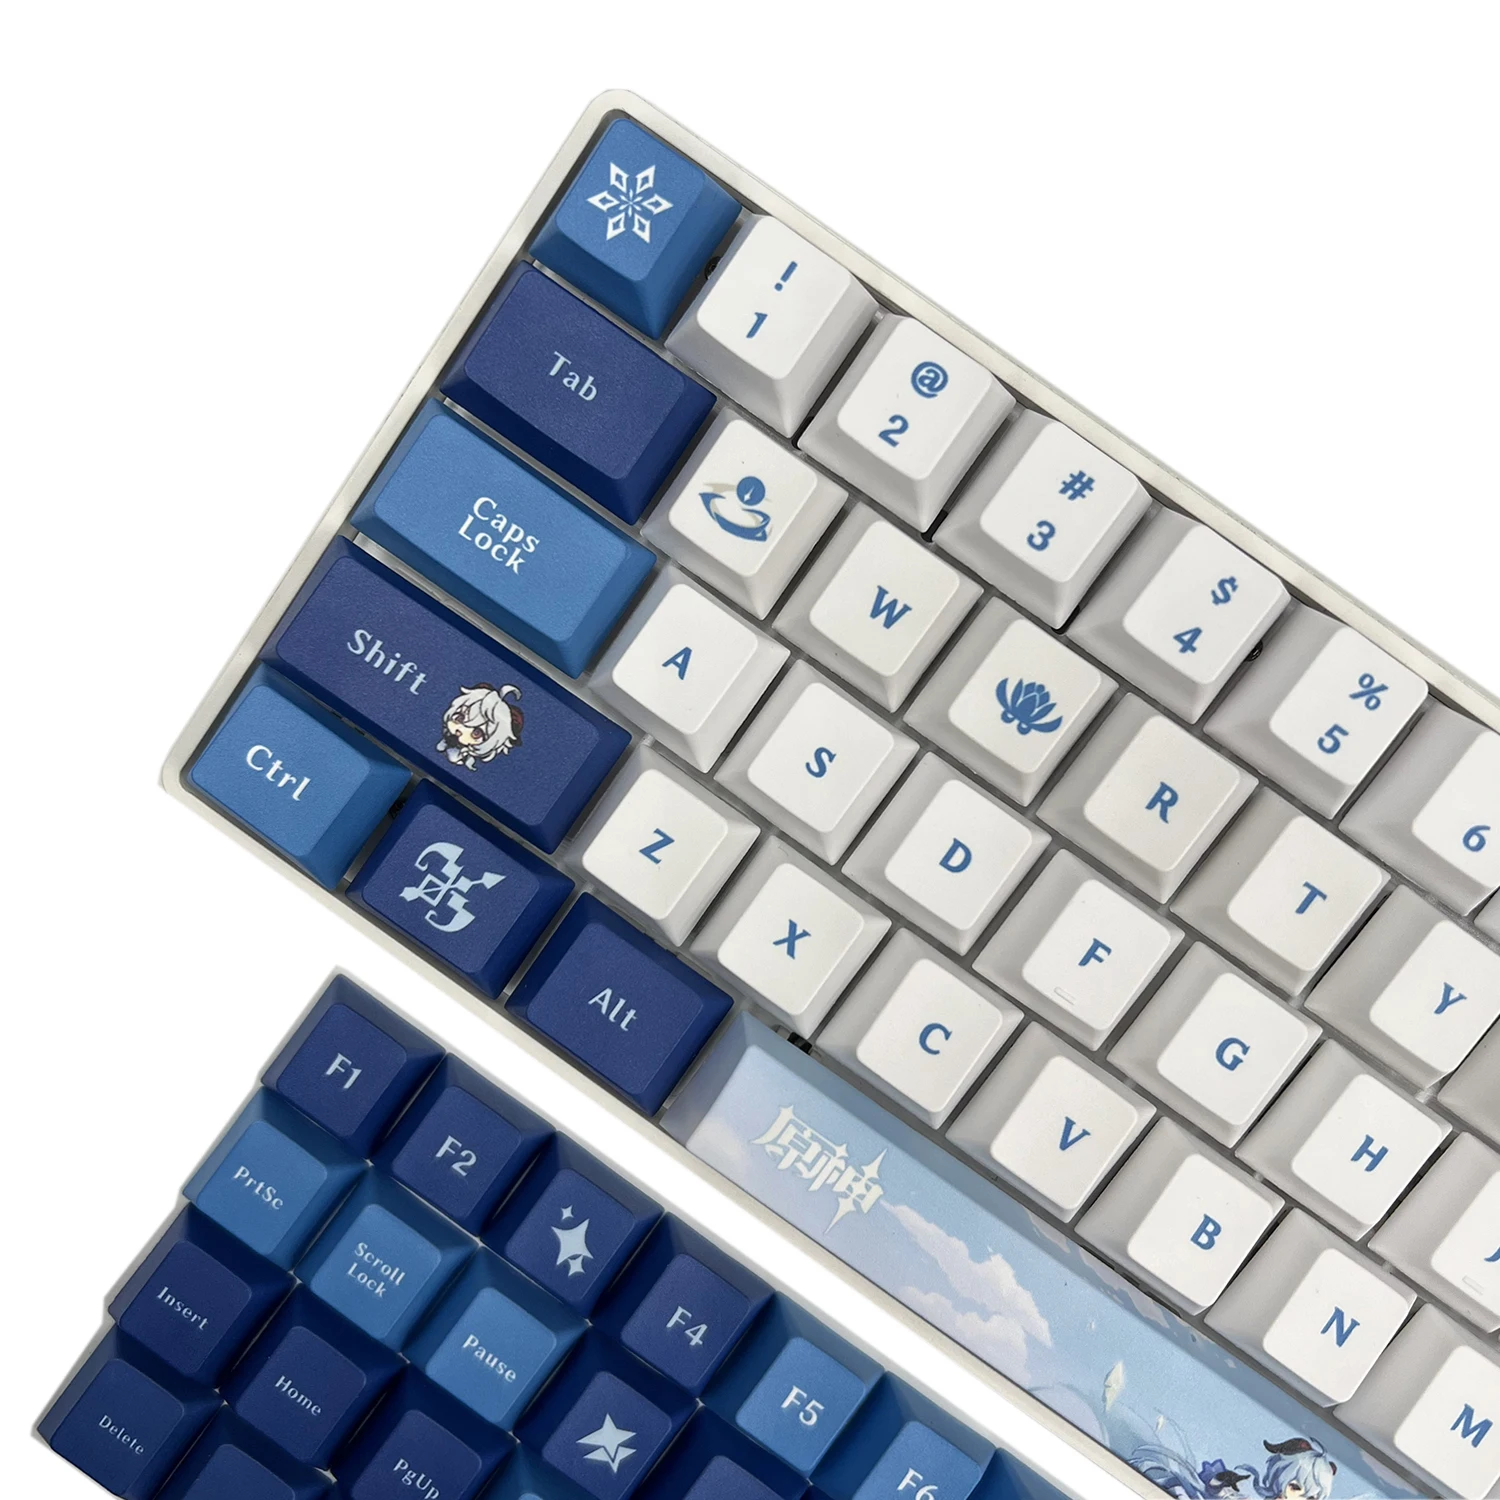 H8158c8820bfd4508802273ad259fdfaby - Anime Keyboard